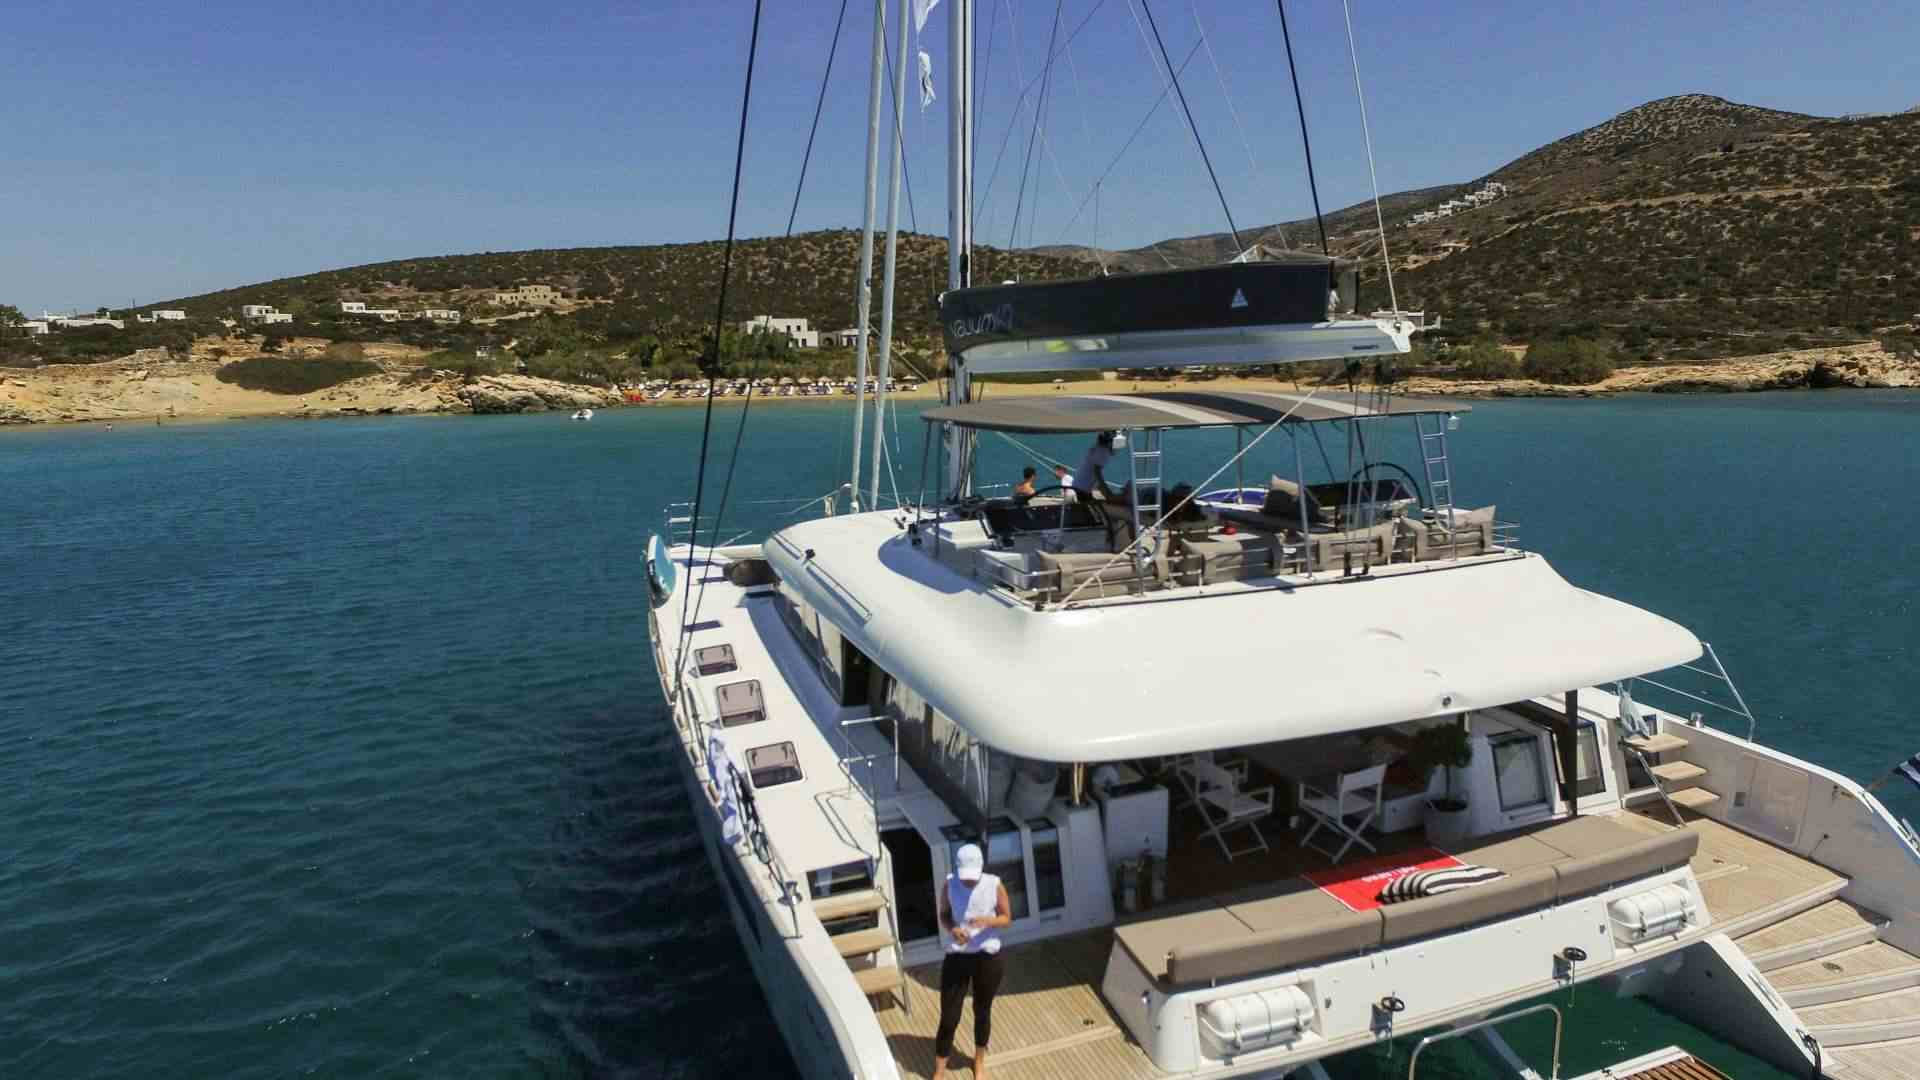 valium62 - Yacht Charter Sithonia & Boat hire in Greece 1